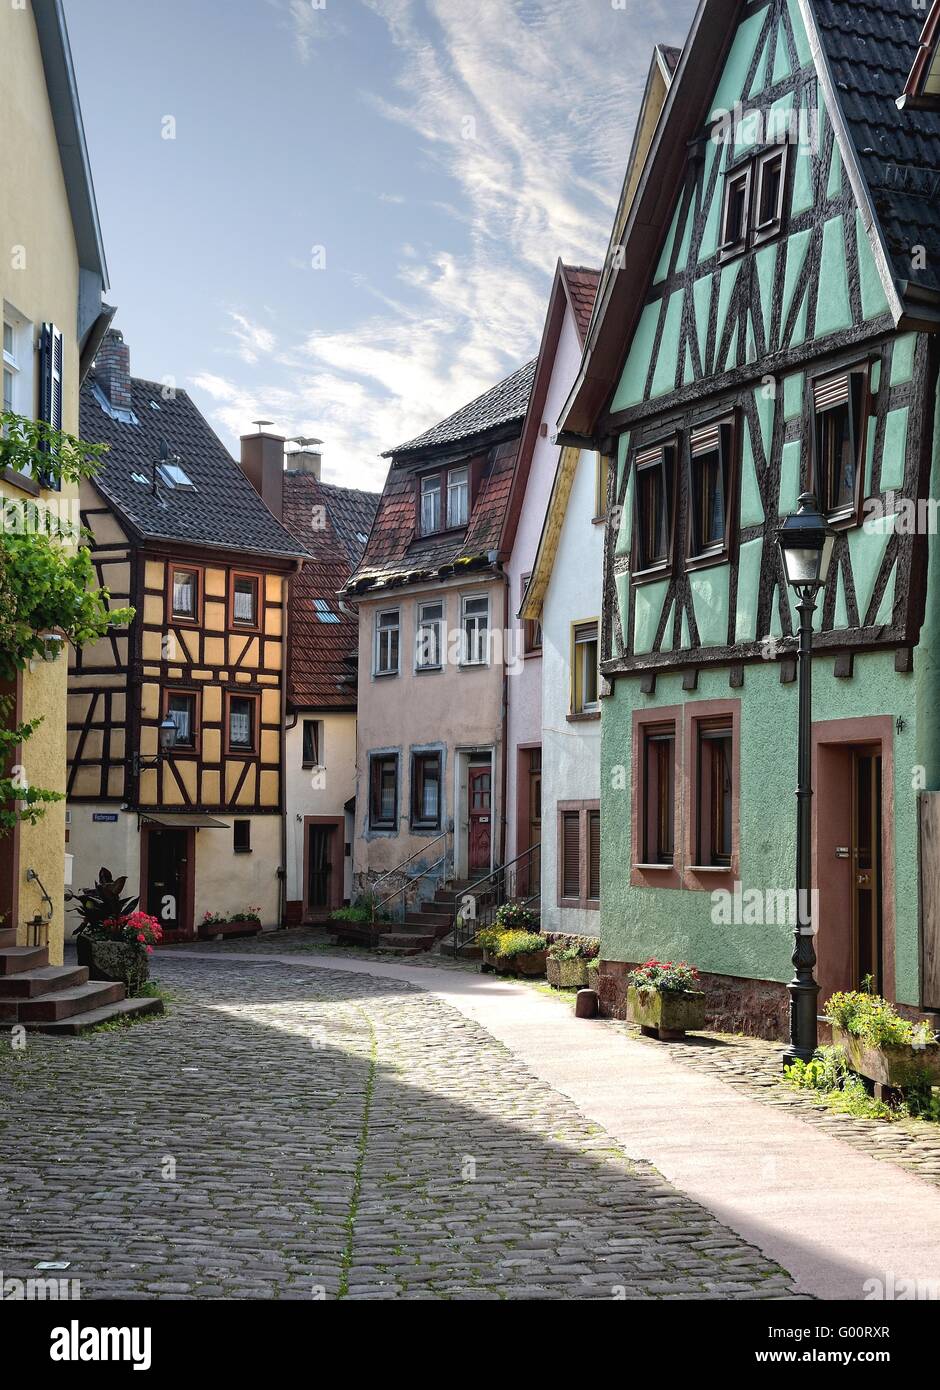 Fisher alley in Lohr am Main Stock Photo